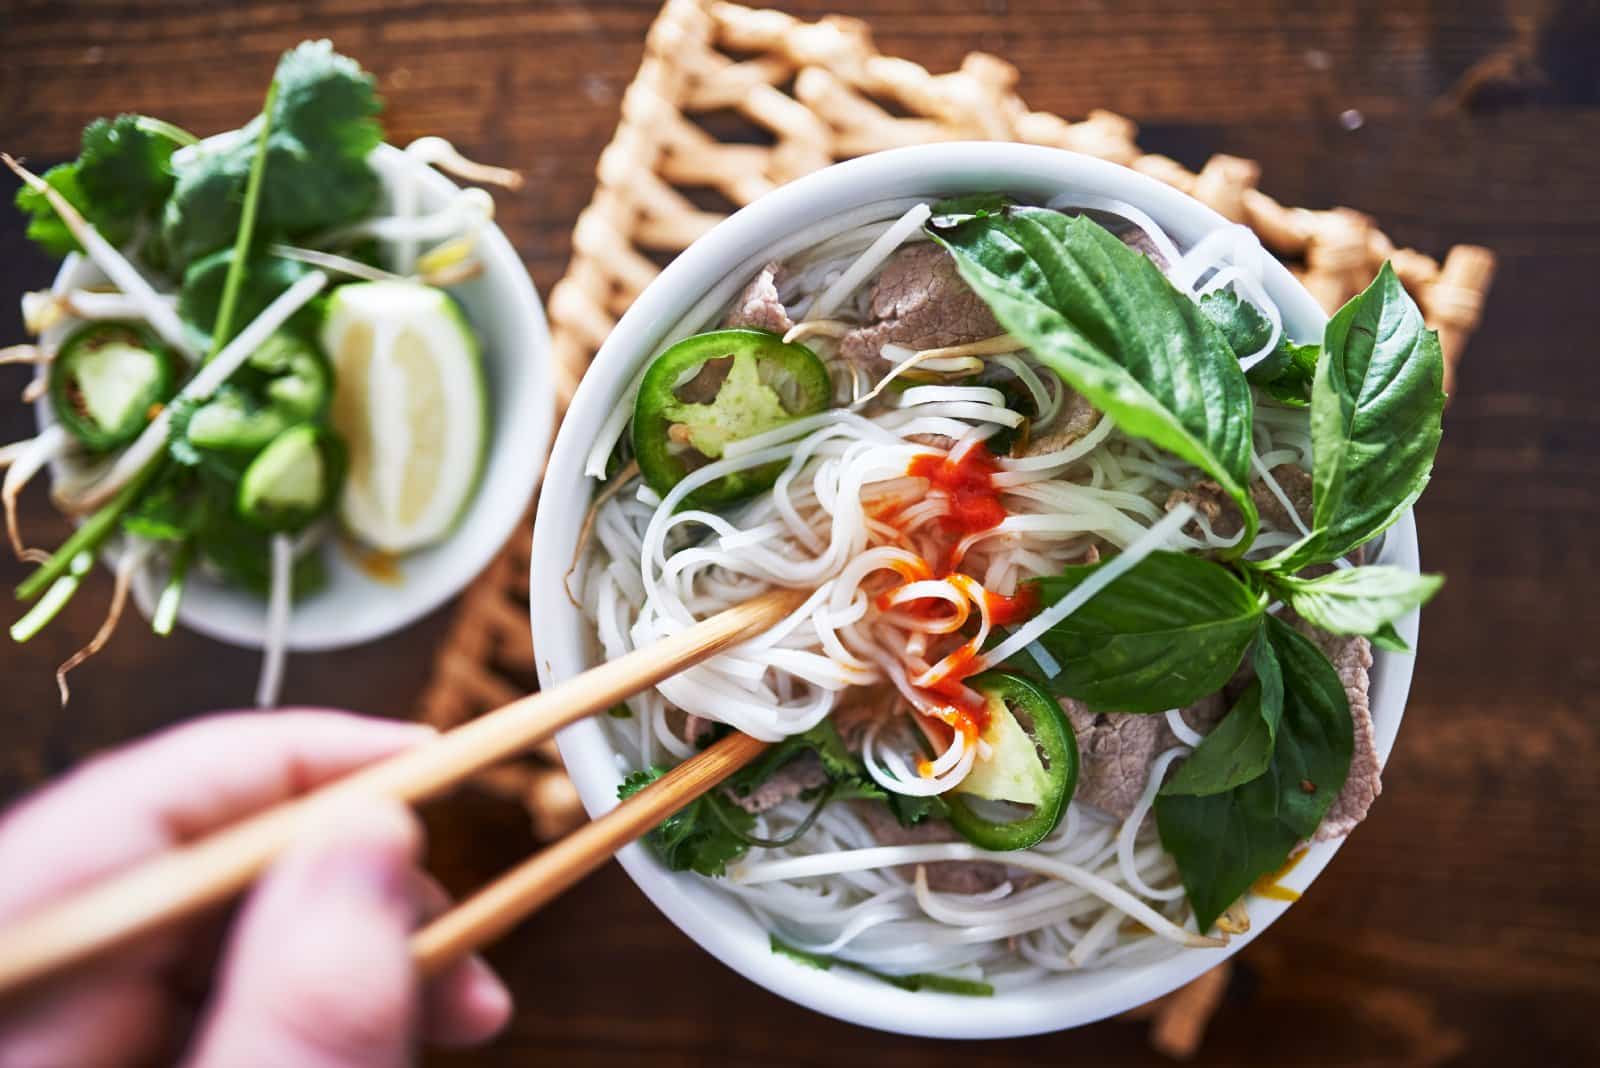 Image Credit: Shutterstock / Joshua Resnick <p>From Bangkok’s bustling streets to Parisian cafes, every corner of the world offers something special for your taste buds. And you don’t have to travel far; even in the USA, you can find a world of flavors. Here are 25 global delicacies every foodie should try, including some local favorites! <strong><a href="https://www.msn.com/en-us/travel/tripideas/25-must-try-global-delicacies/ss-AA1nRrZ4">25 Must-Try Global Delicacies</a></strong></p> <p><span>The post <span>Beyond the Hype: Authentic Positivity Hacks Millennials Swear By</span> first appeared on Hello Positive Mindset.</span></p> <p><span>Featured Image Credit: Shutterstock / Zamrznuti tonovi.</span></p> <p><span>For transparency, this content was partly developed with AI assistance and carefully curated by an experienced editor to be informative and ensure accuracy.</span></p>